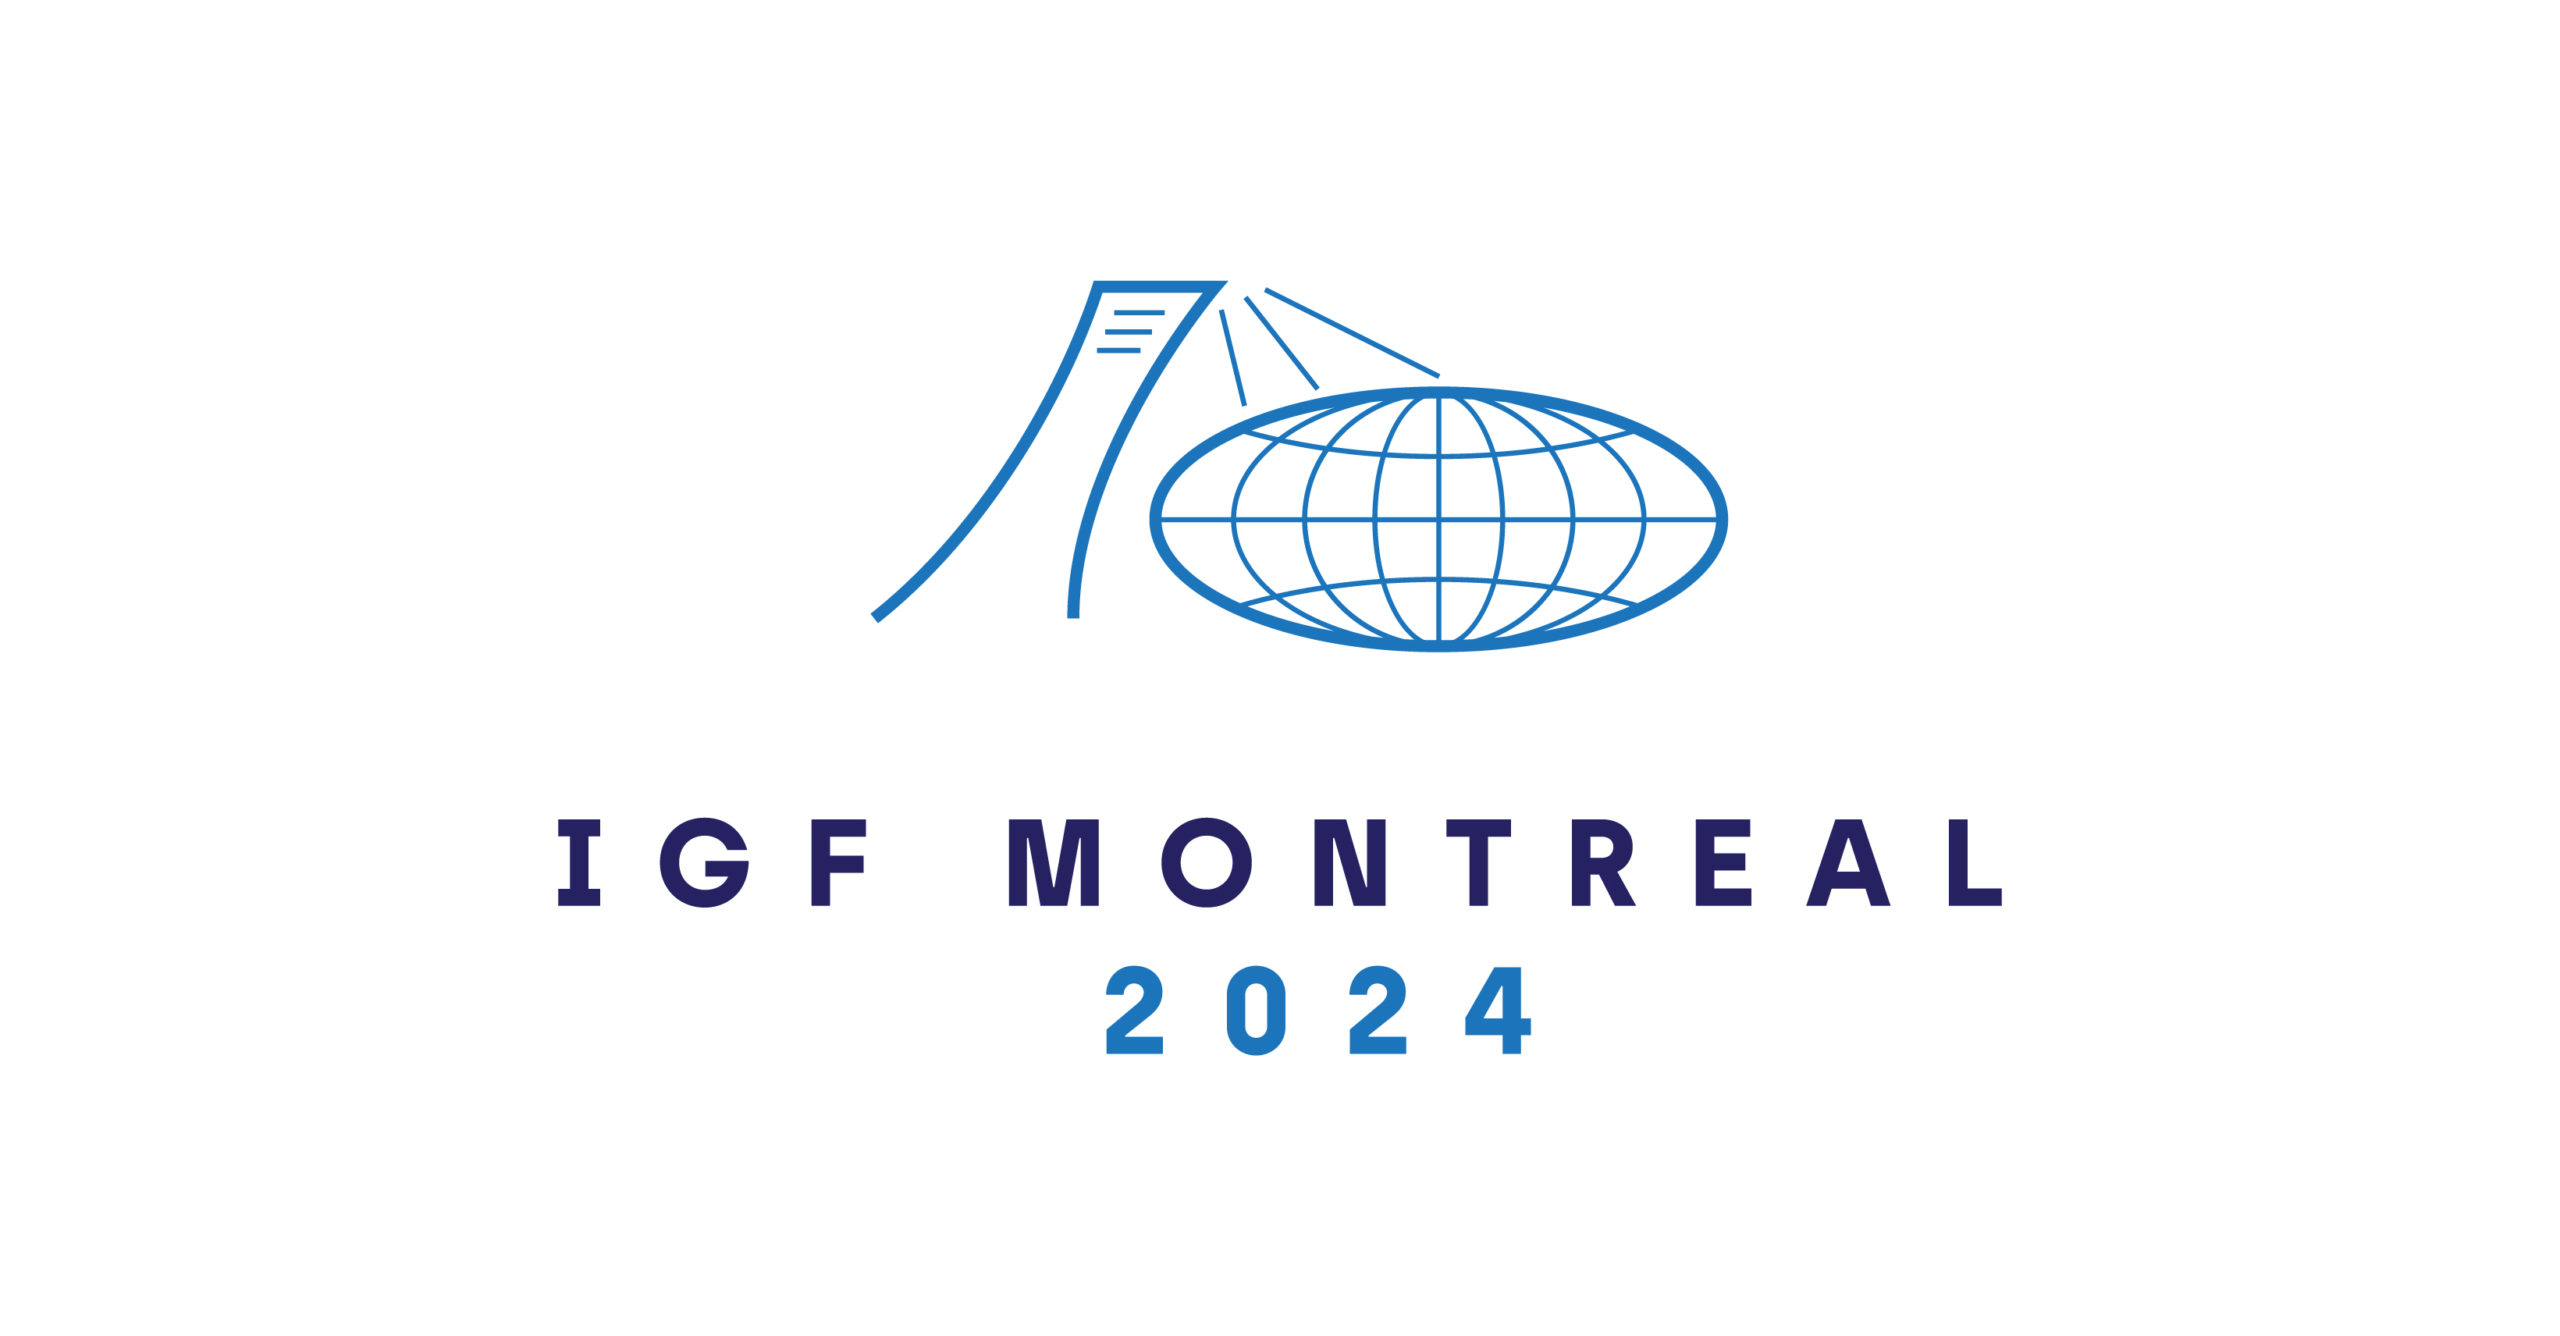 Governance Forum 2024 in Montreal!